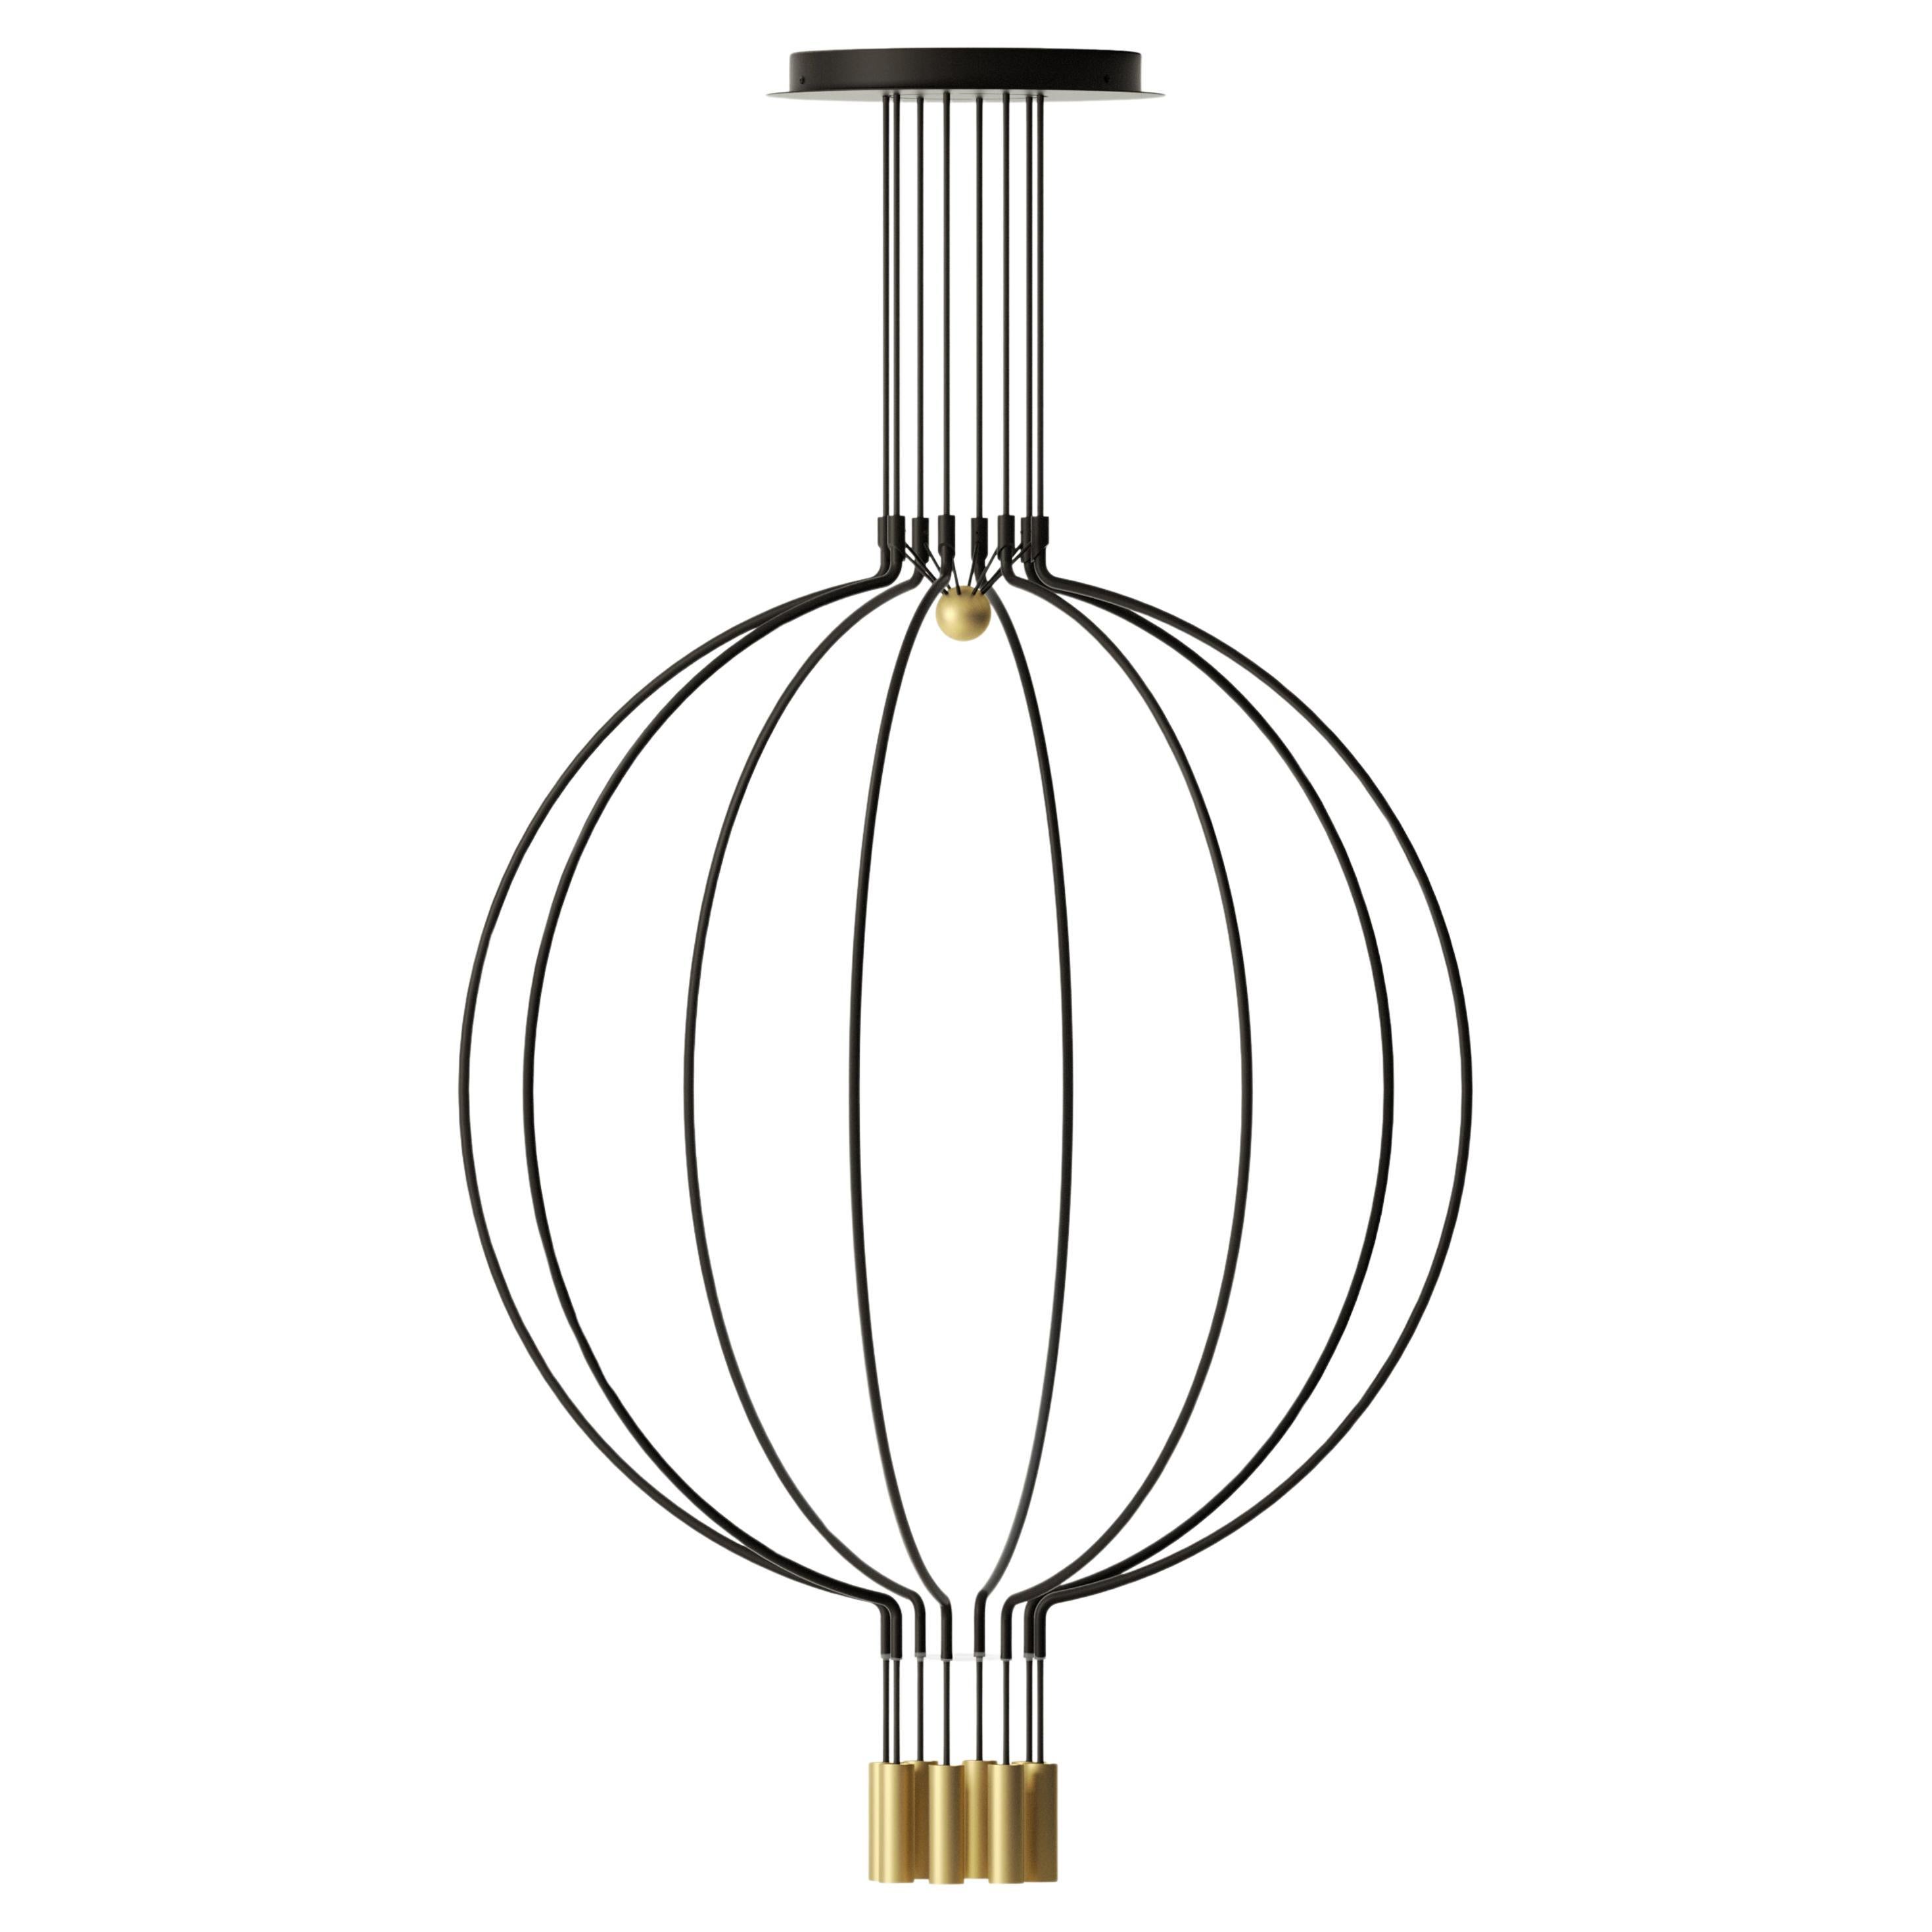 Axolight Liaison Model G8 Pendant Lamp in Black/Gold by Sara Moroni For Sale